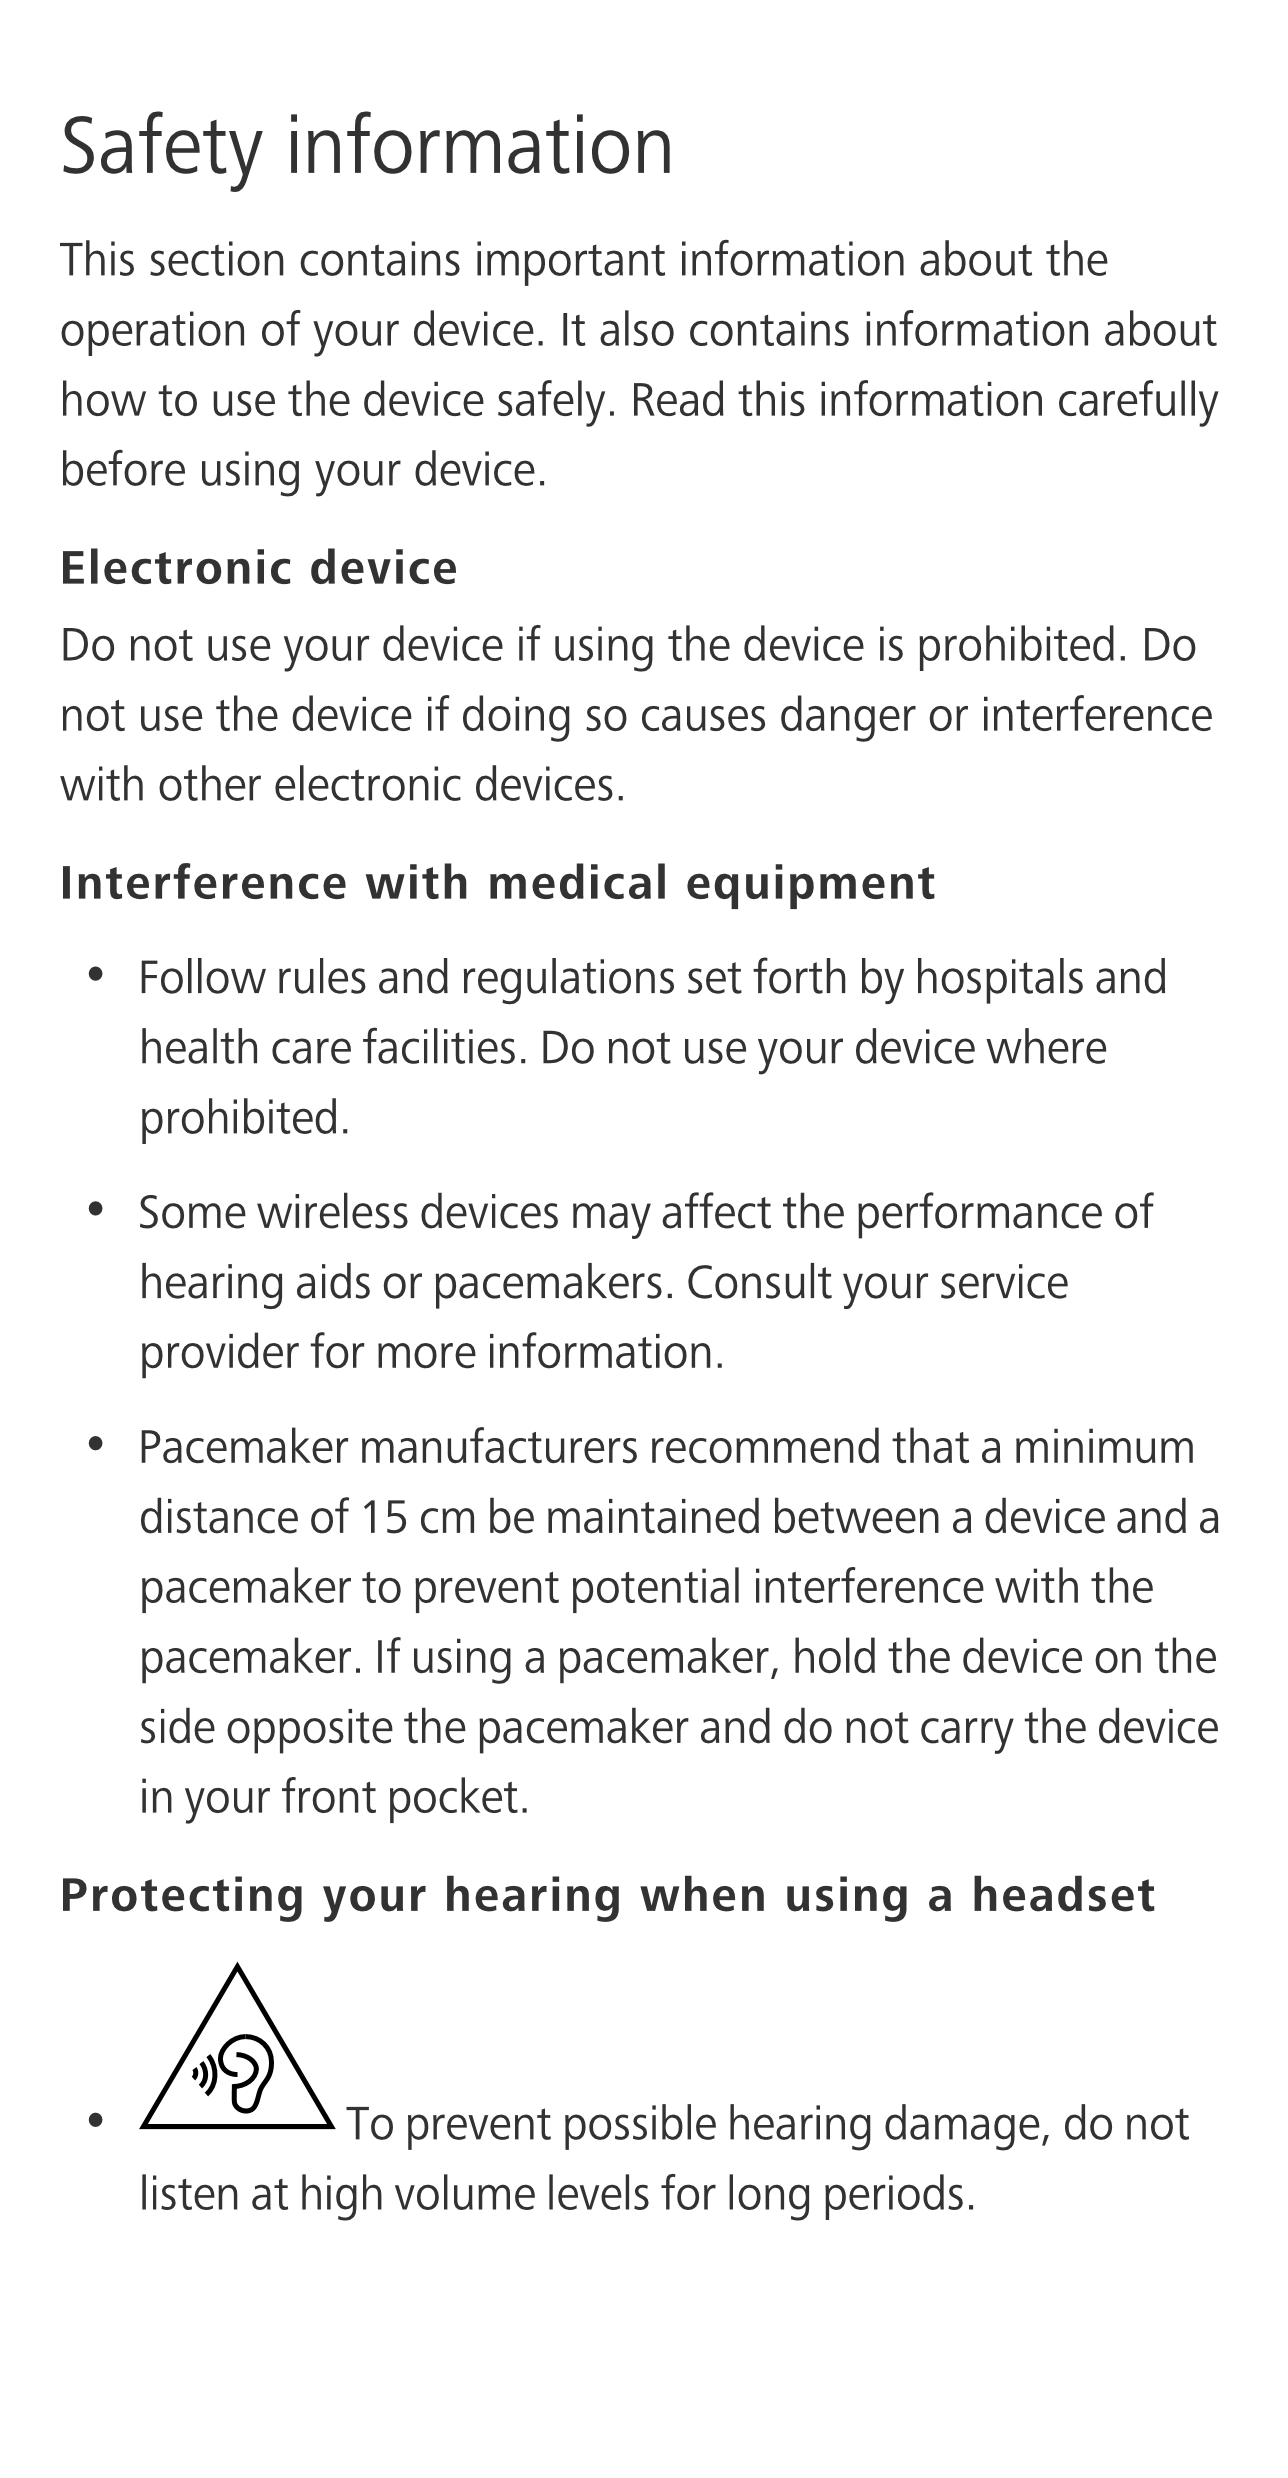 Safety information
This section contains important information about the 
operation of your device. It also contains information